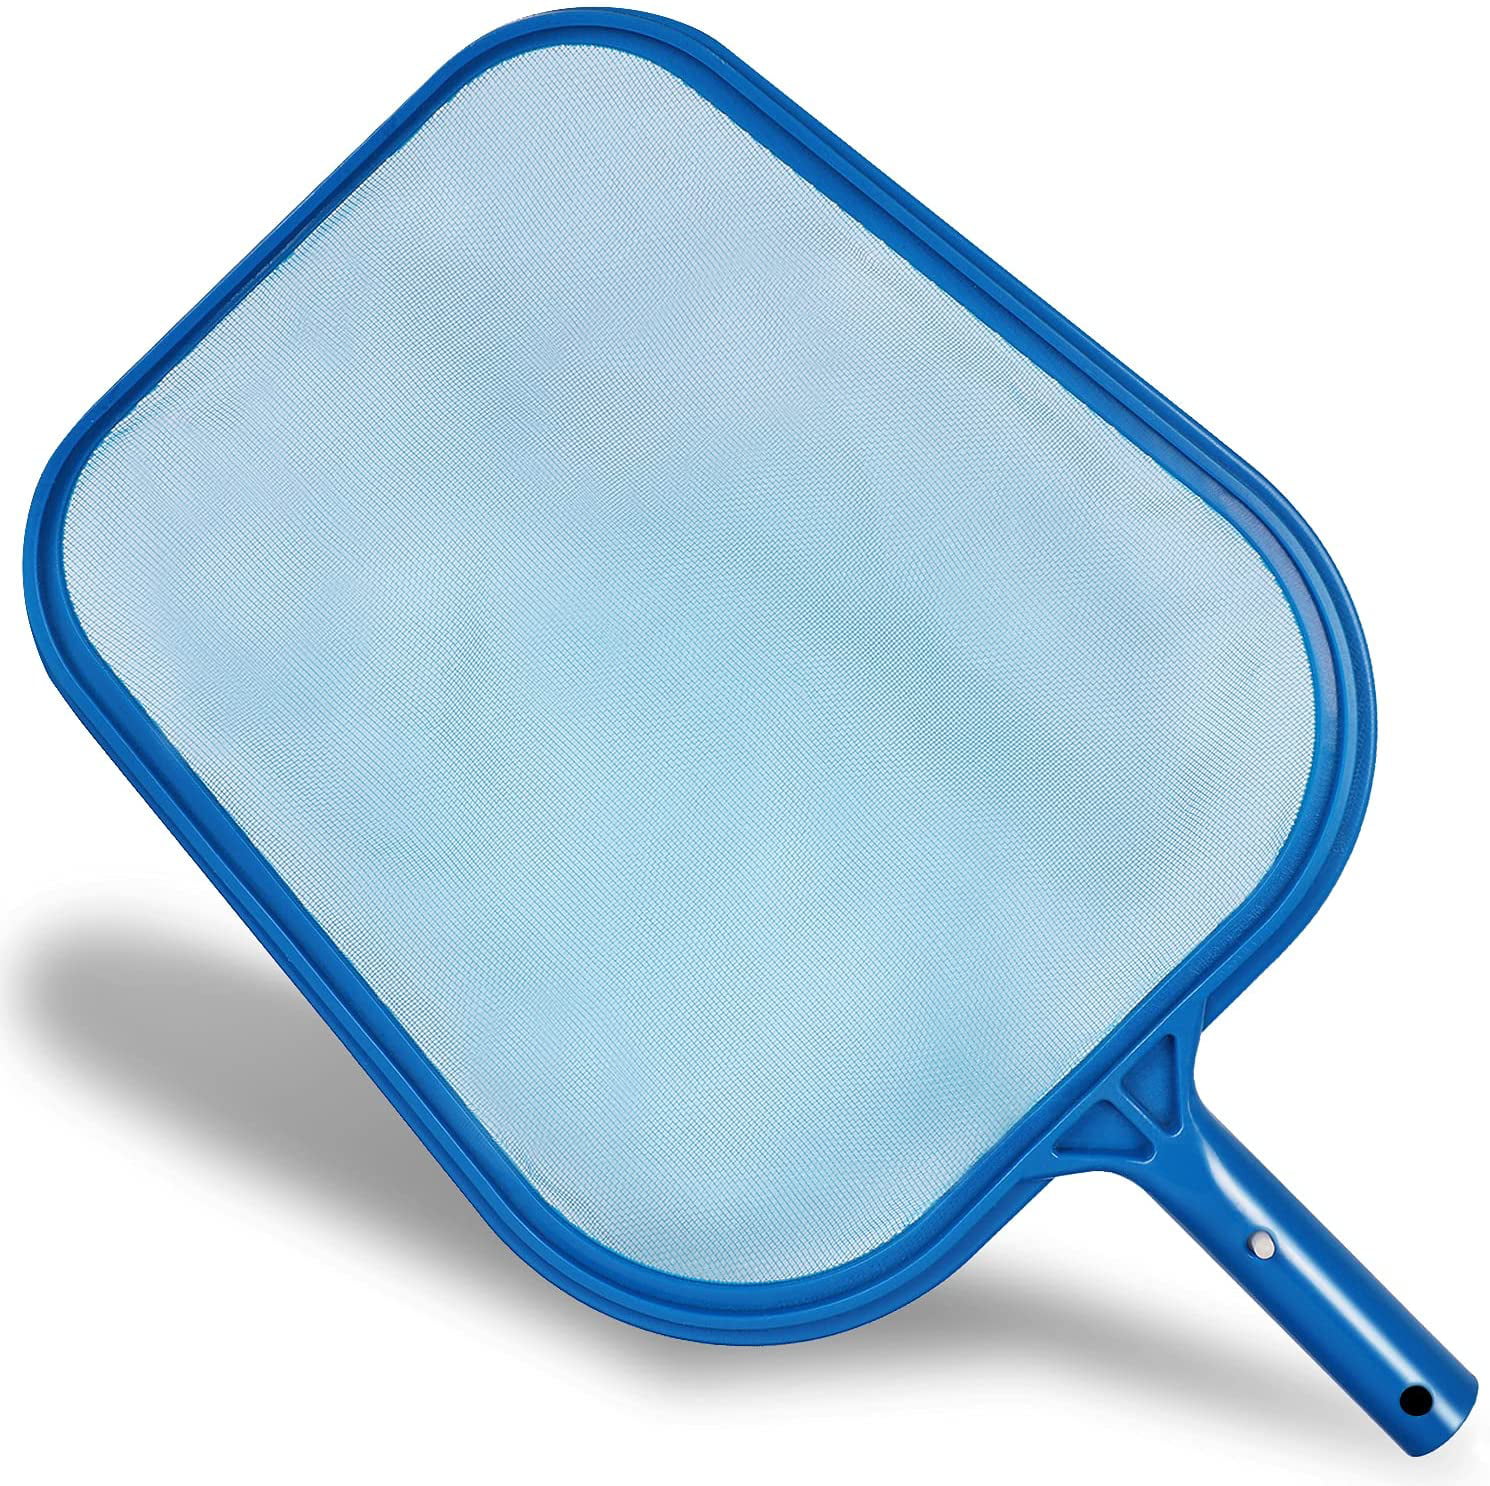 Spas and Fountains Hot Tubs Swimming Pool Leaf Rake Skimmer Net Cleaning Tool for Cleaning Swimming Pools Blissun Pool Skimmer Net Fine Mesh Net Bag Catcher 